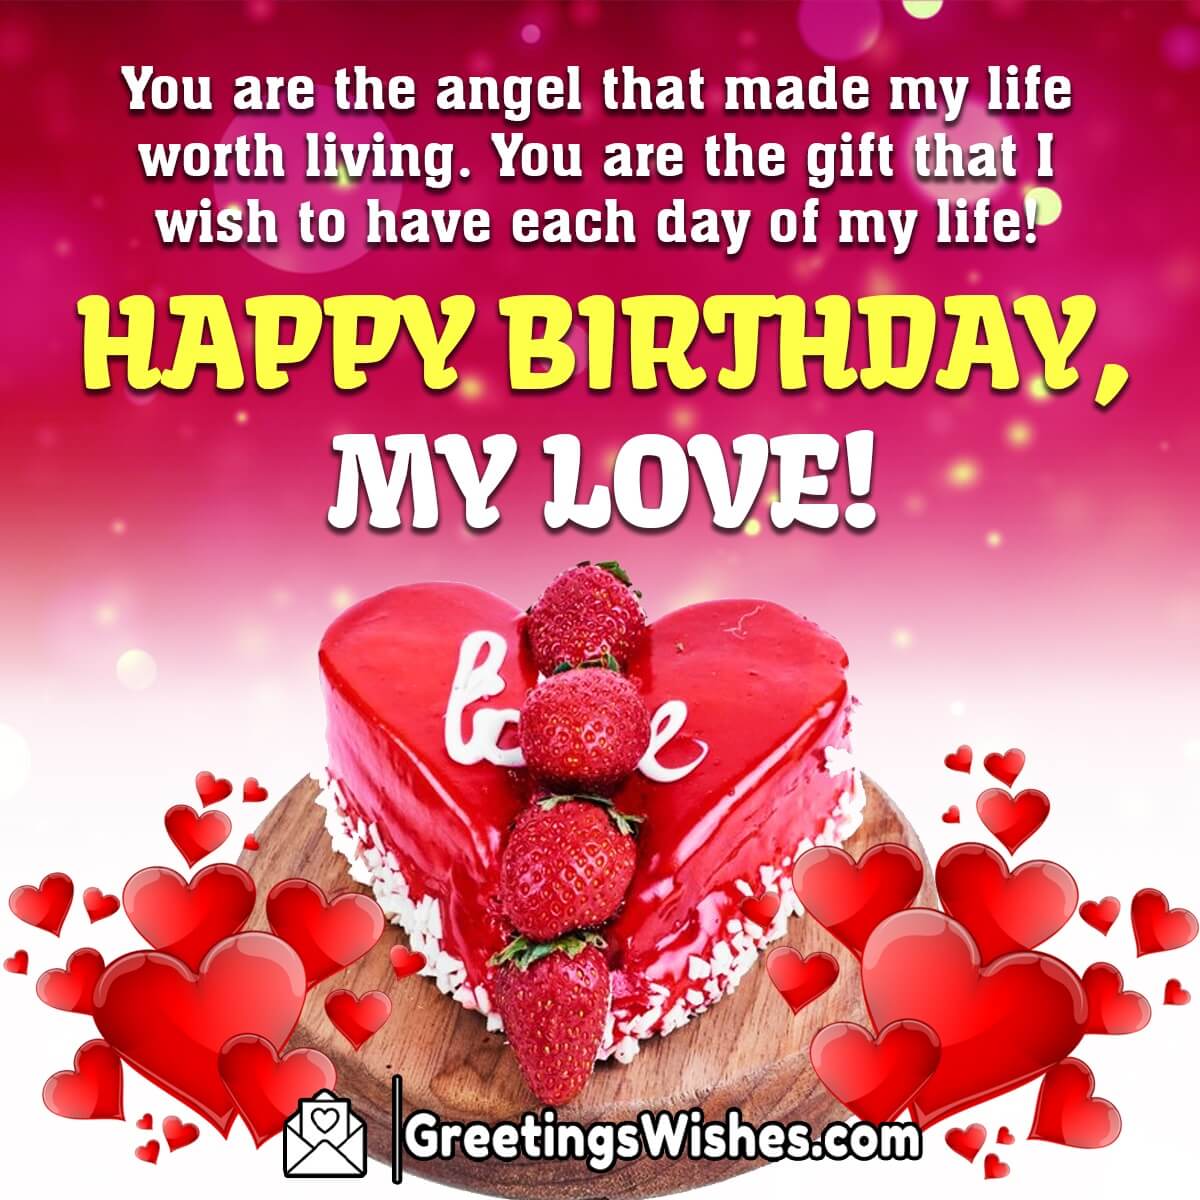 Romantic Birthday Wishes - Greetings Wishes